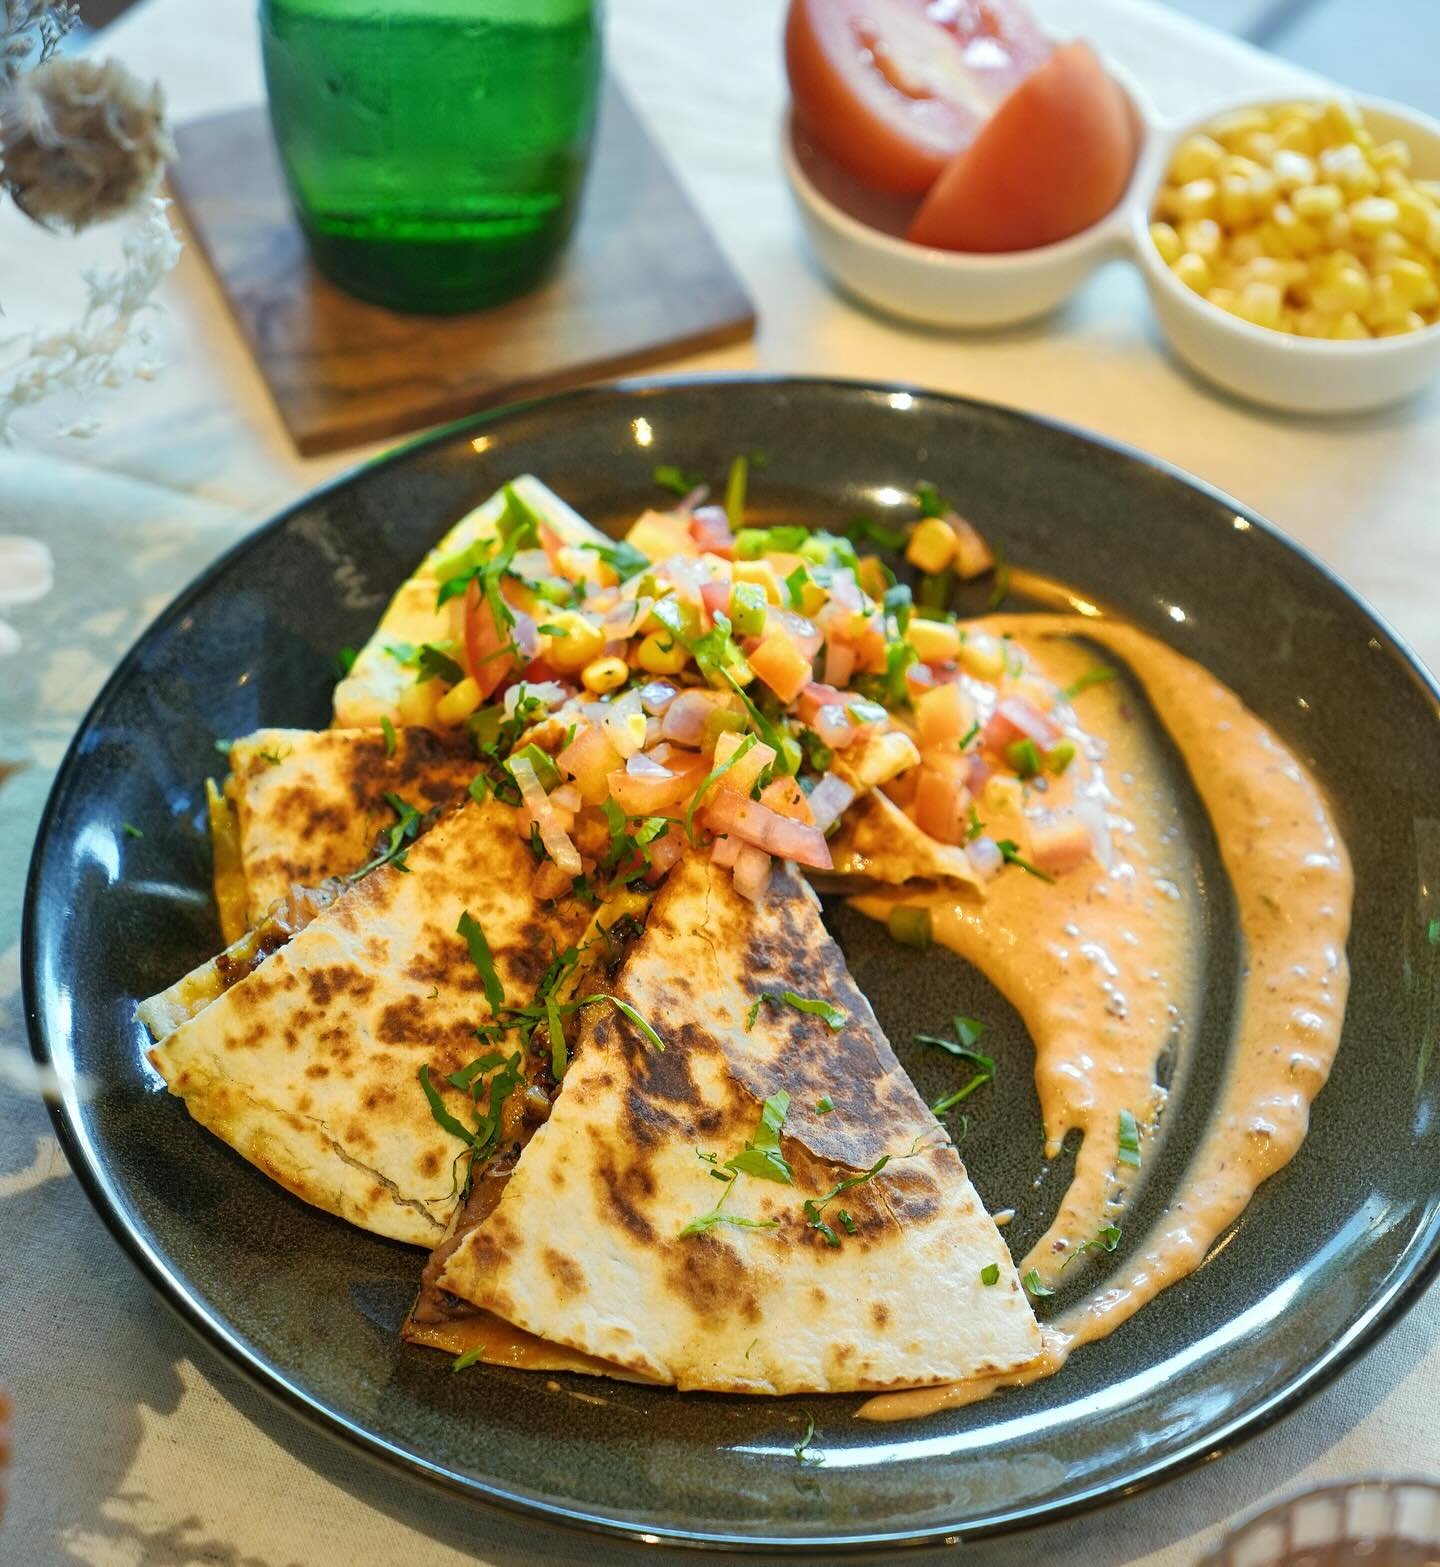 Hola beautiful, will you join us for some quesadillas?
.
Our Chef&rsquo;s Special this April has the perfect harmony of flavours and textures -toasty tortillas with spiced grilled chicken, corn salsa, chipotle mayo and three cheeses.
.
Book your tabl